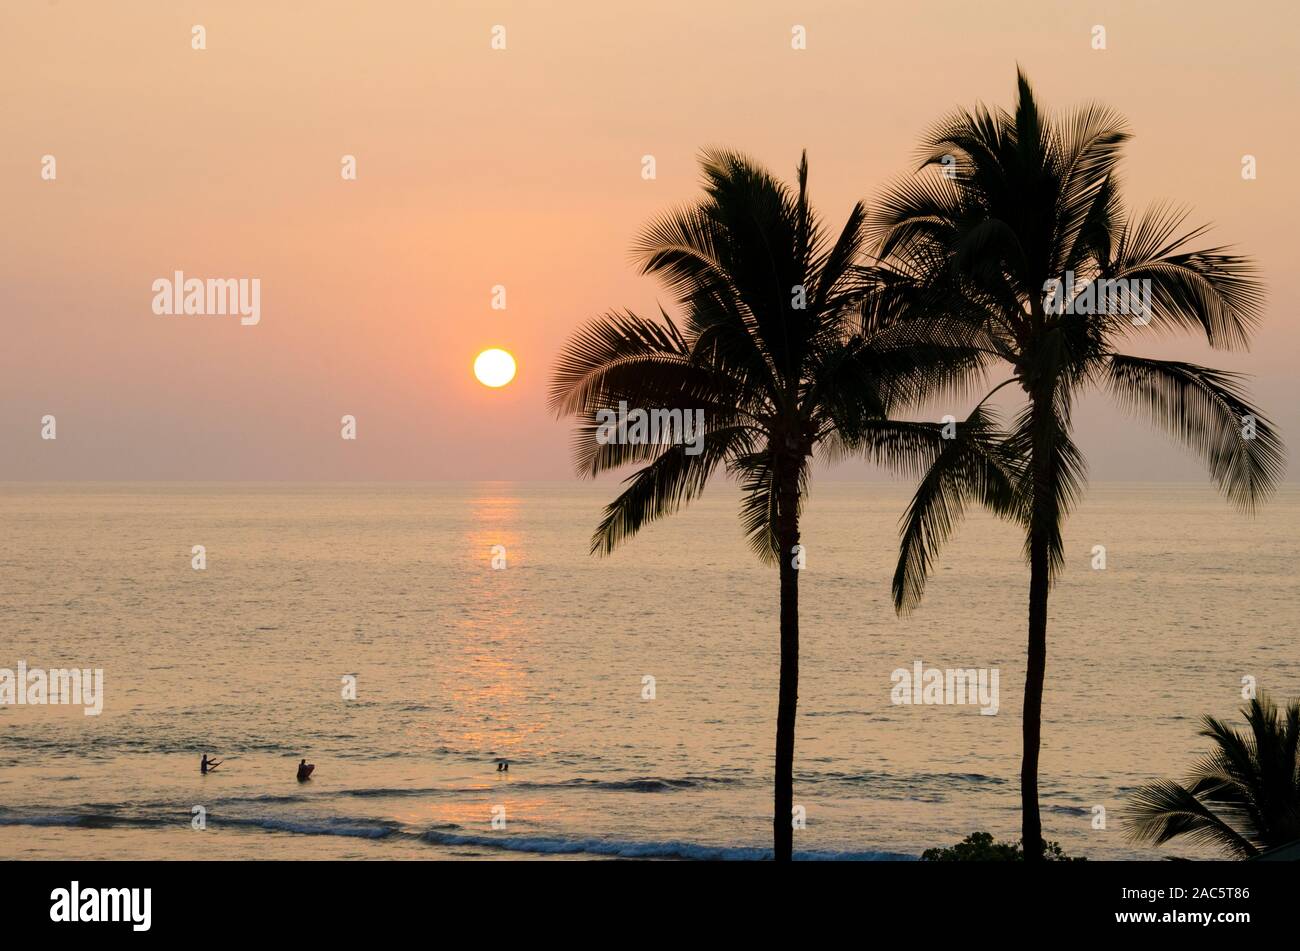 A beautiful sunset at Hapuna beach, with silhouetted palm trees and people in ocean, Island of Hawai'i. Stock Photo